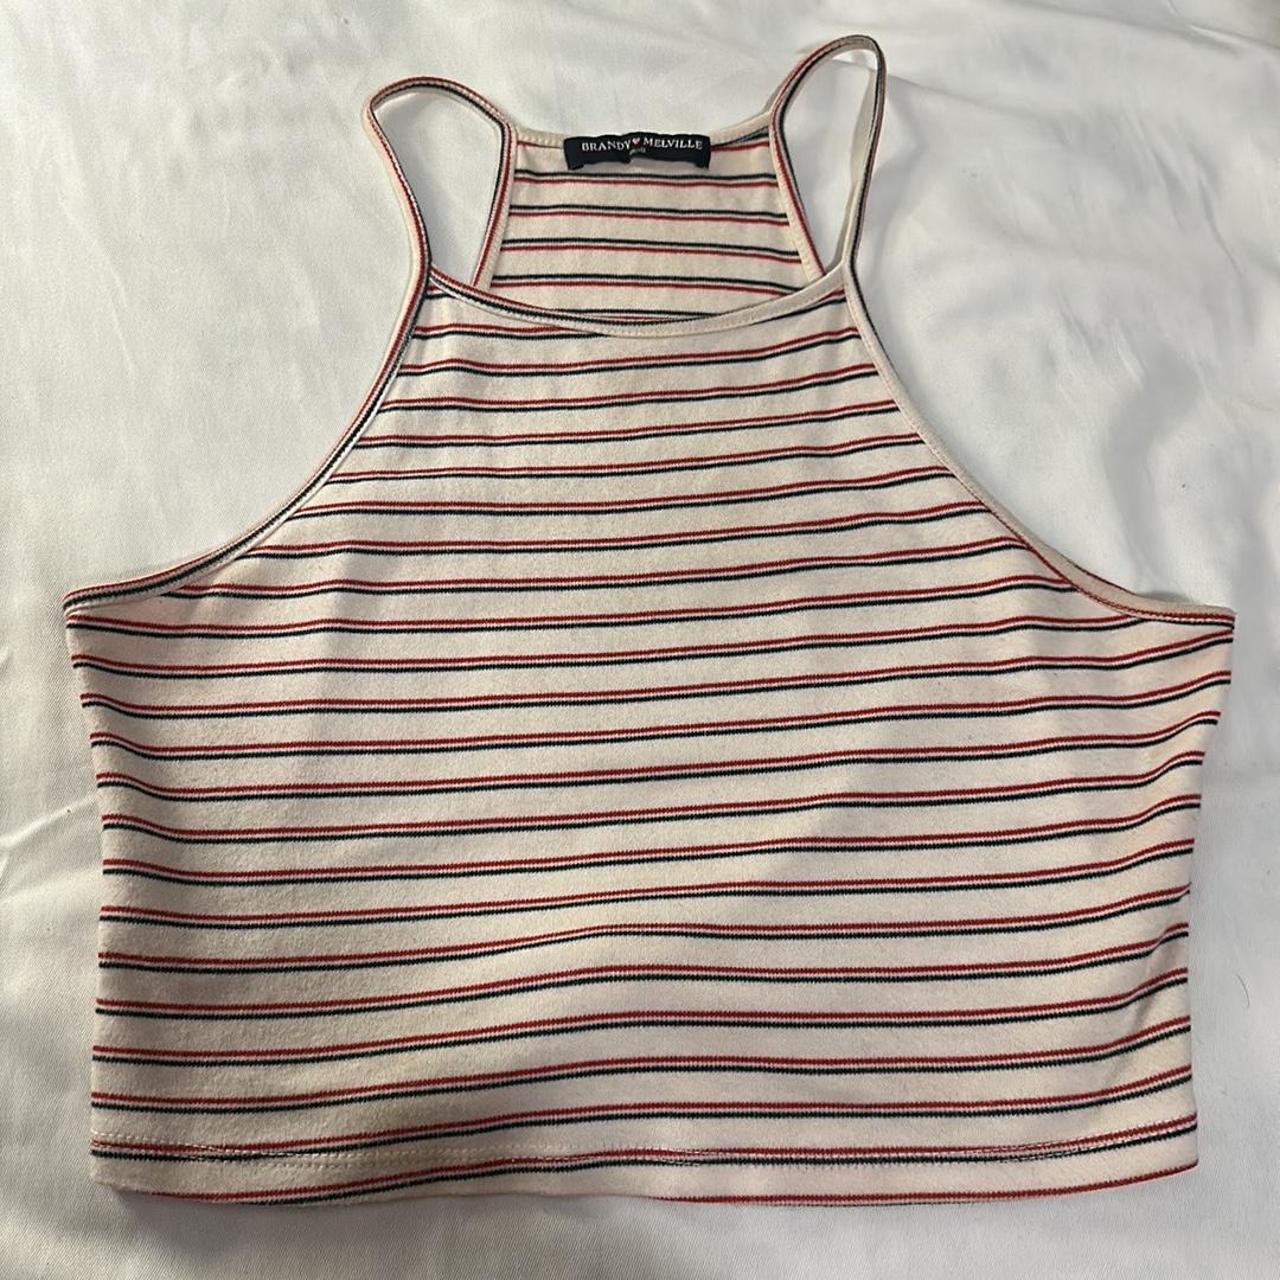 Brandy Melville Striped Black and White Tank Top